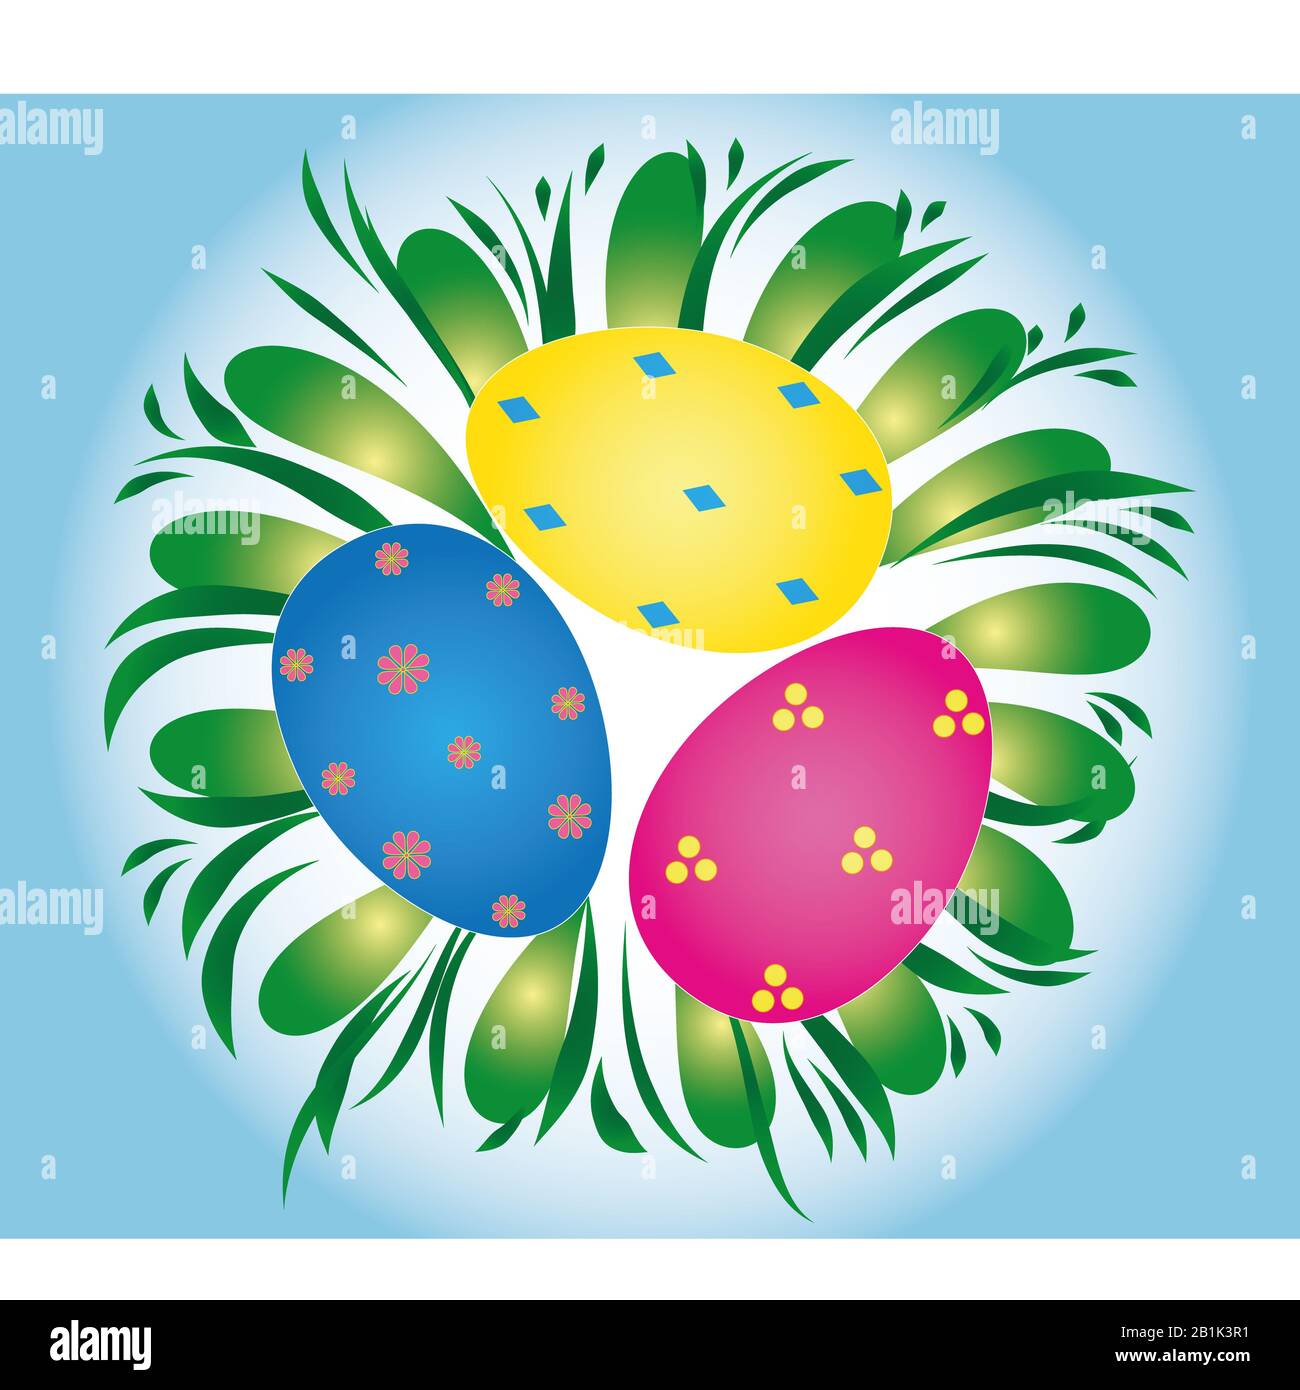 Easter eggs, red yellow blue. Green grass all around. Illustration . Stock Photo